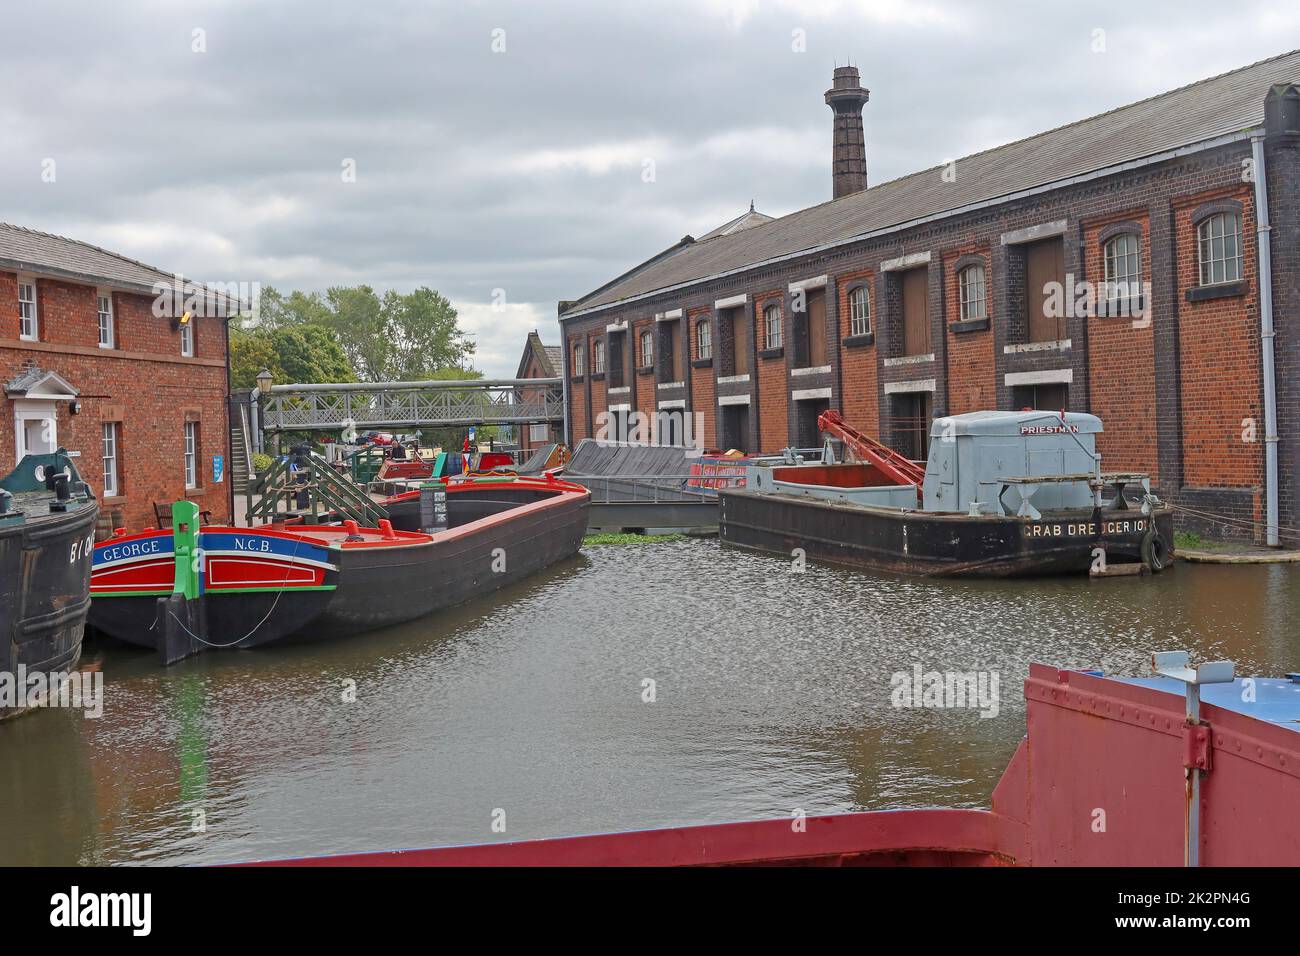 George NCB, & Priestman Crab dredger boat carriers, Shropshire Union canal at Ellesmere Port, Cheshire, England, UK Stock Photo